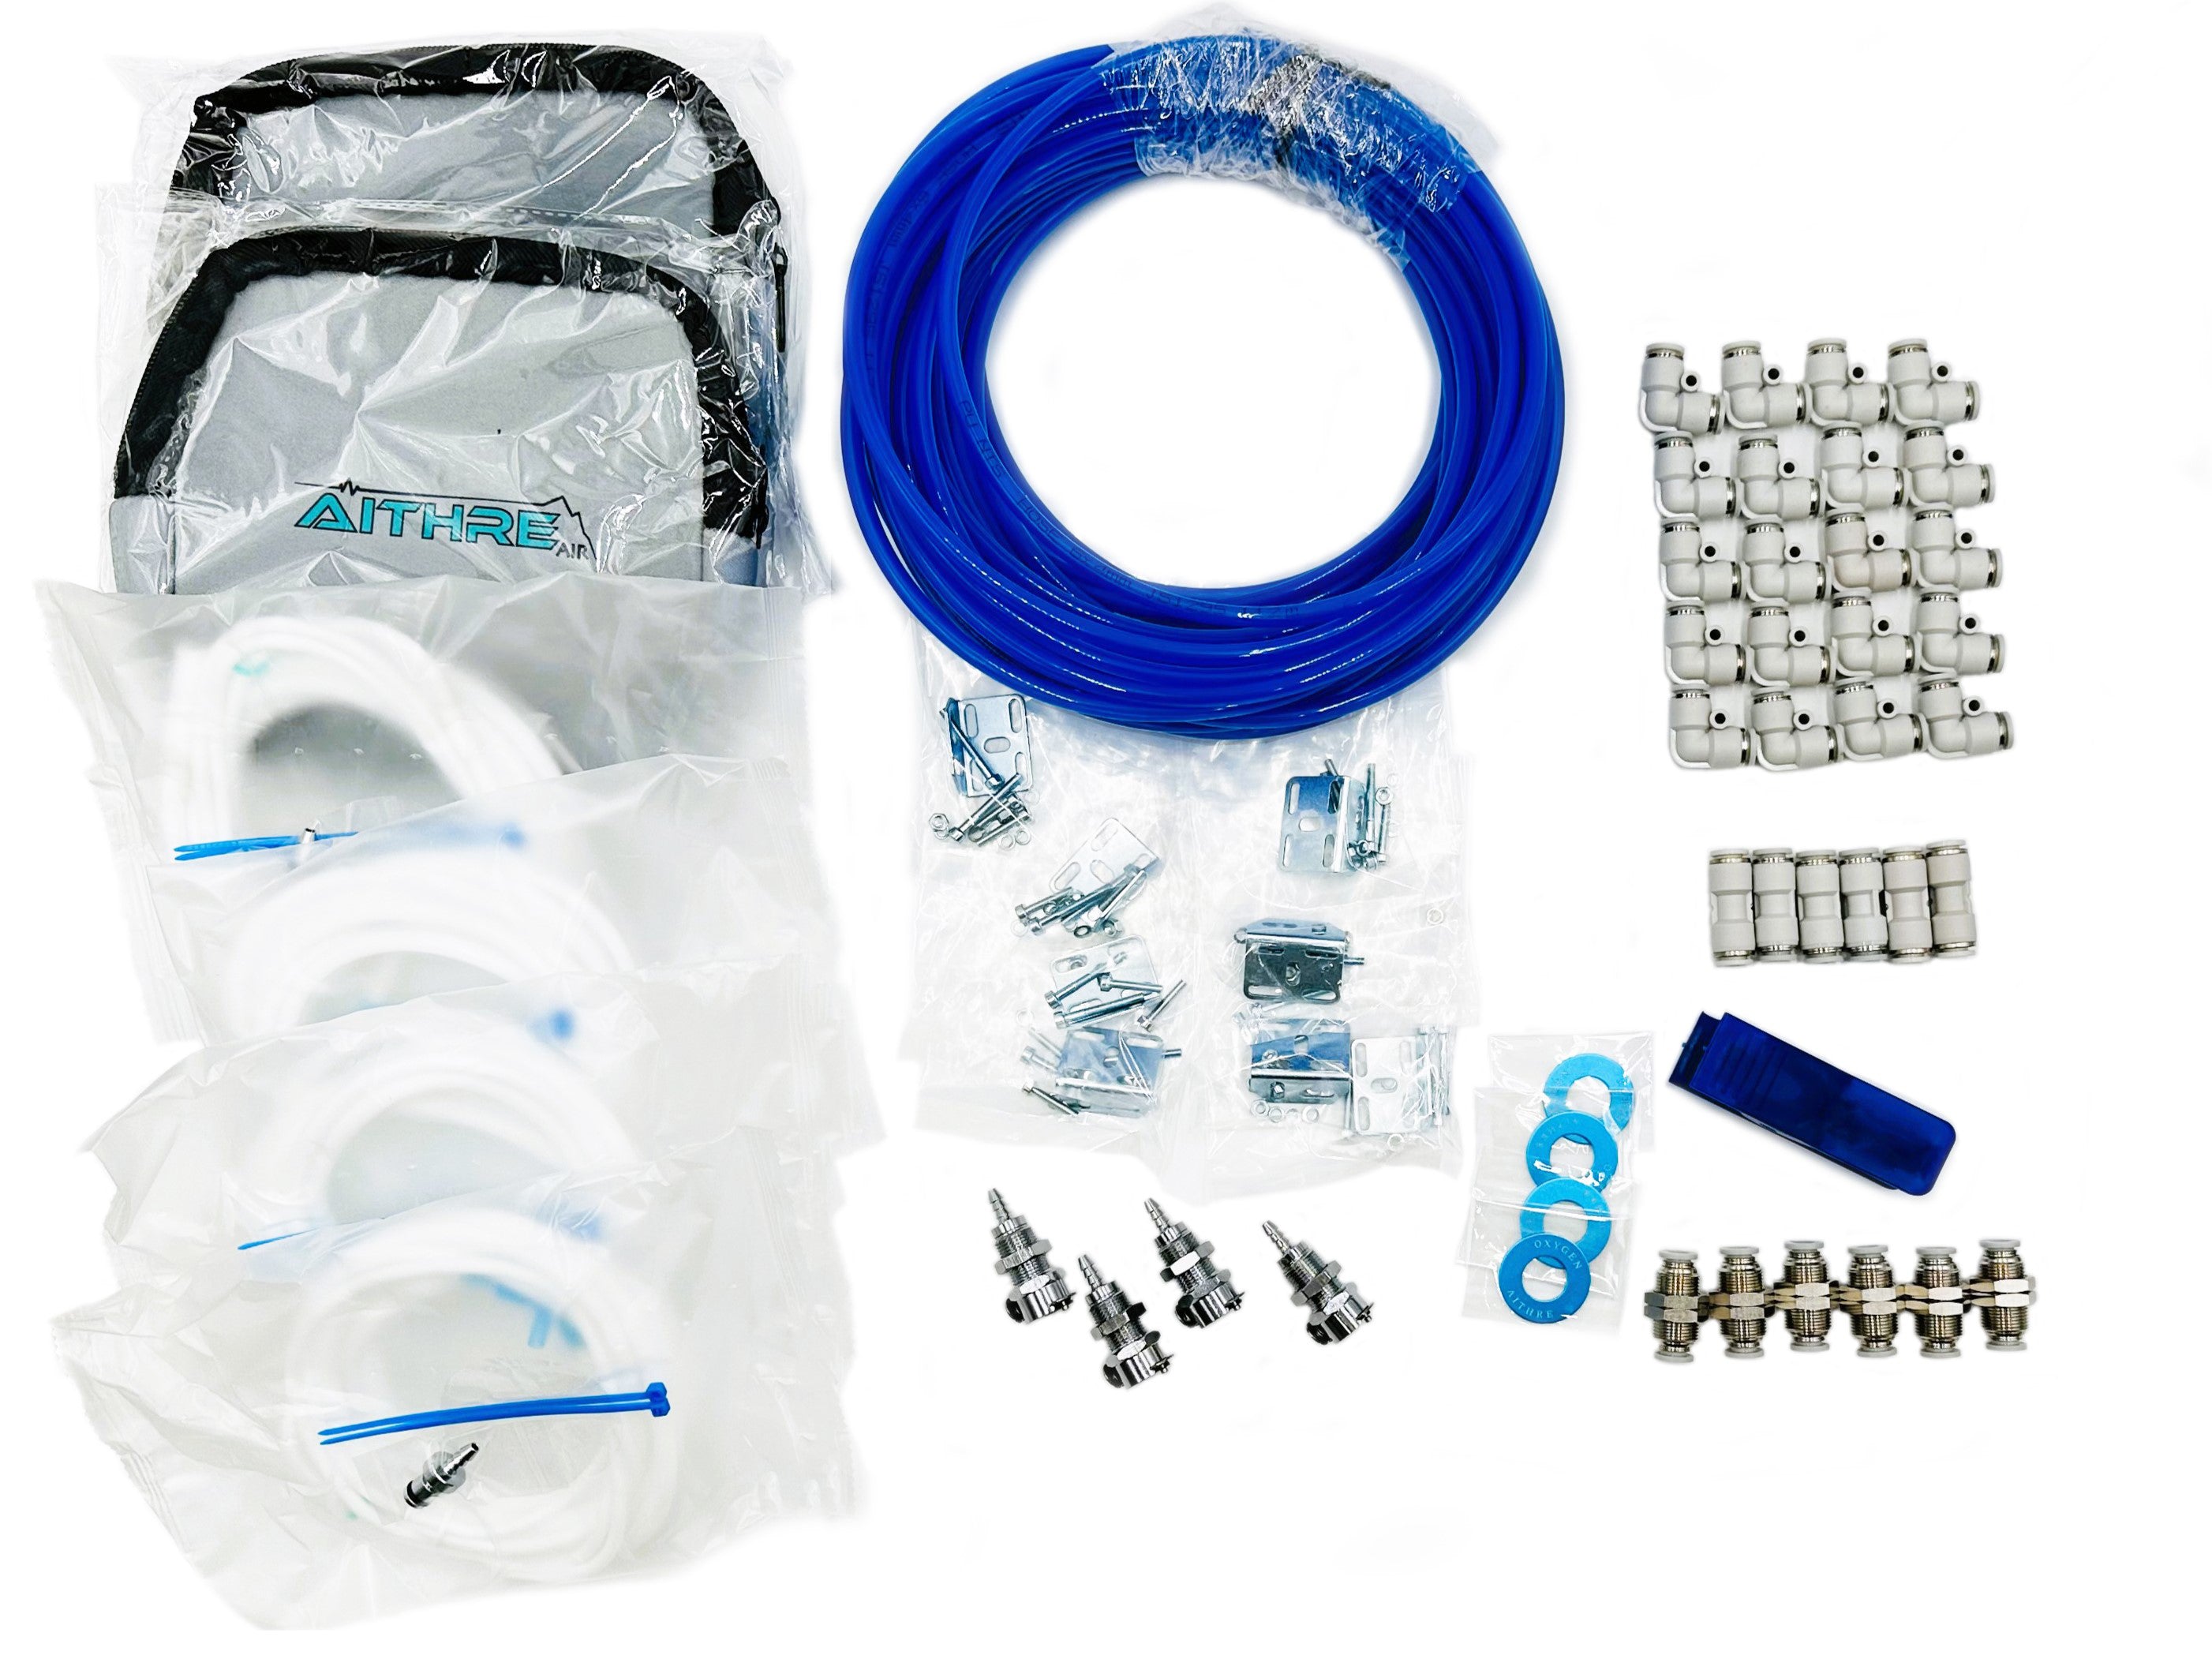 AVI64C 4-Place Smart Oxygen Systems for Certified Aircraft with Healthview